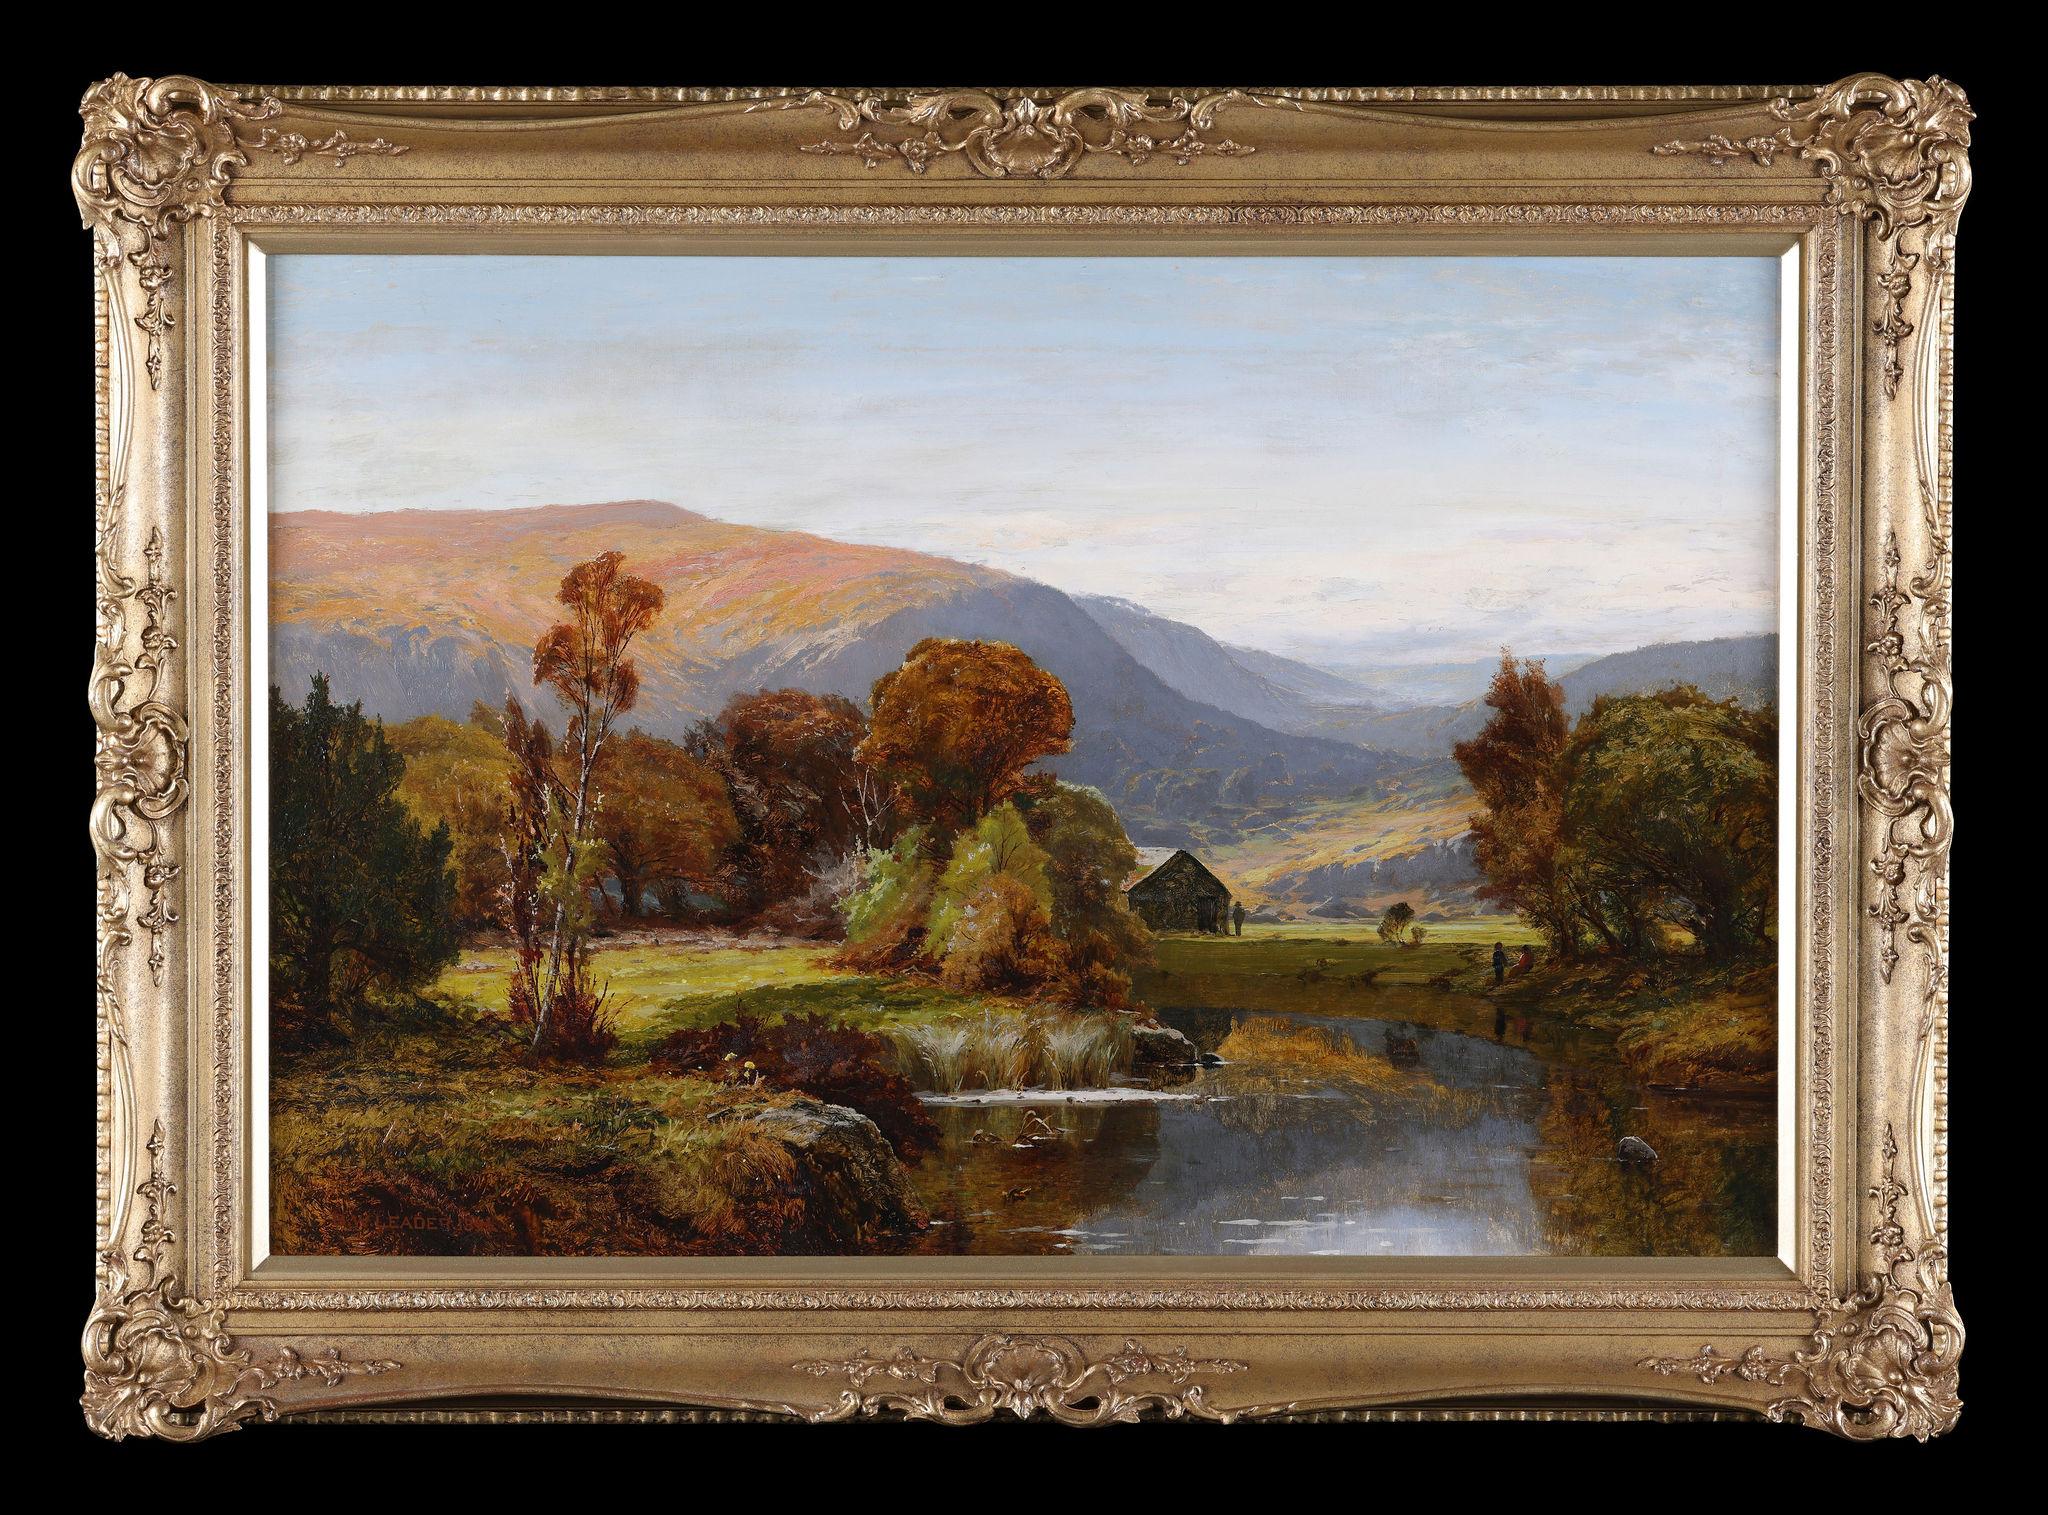 At Capel Curig, North Wales  - Painting by Benjamin W Leader